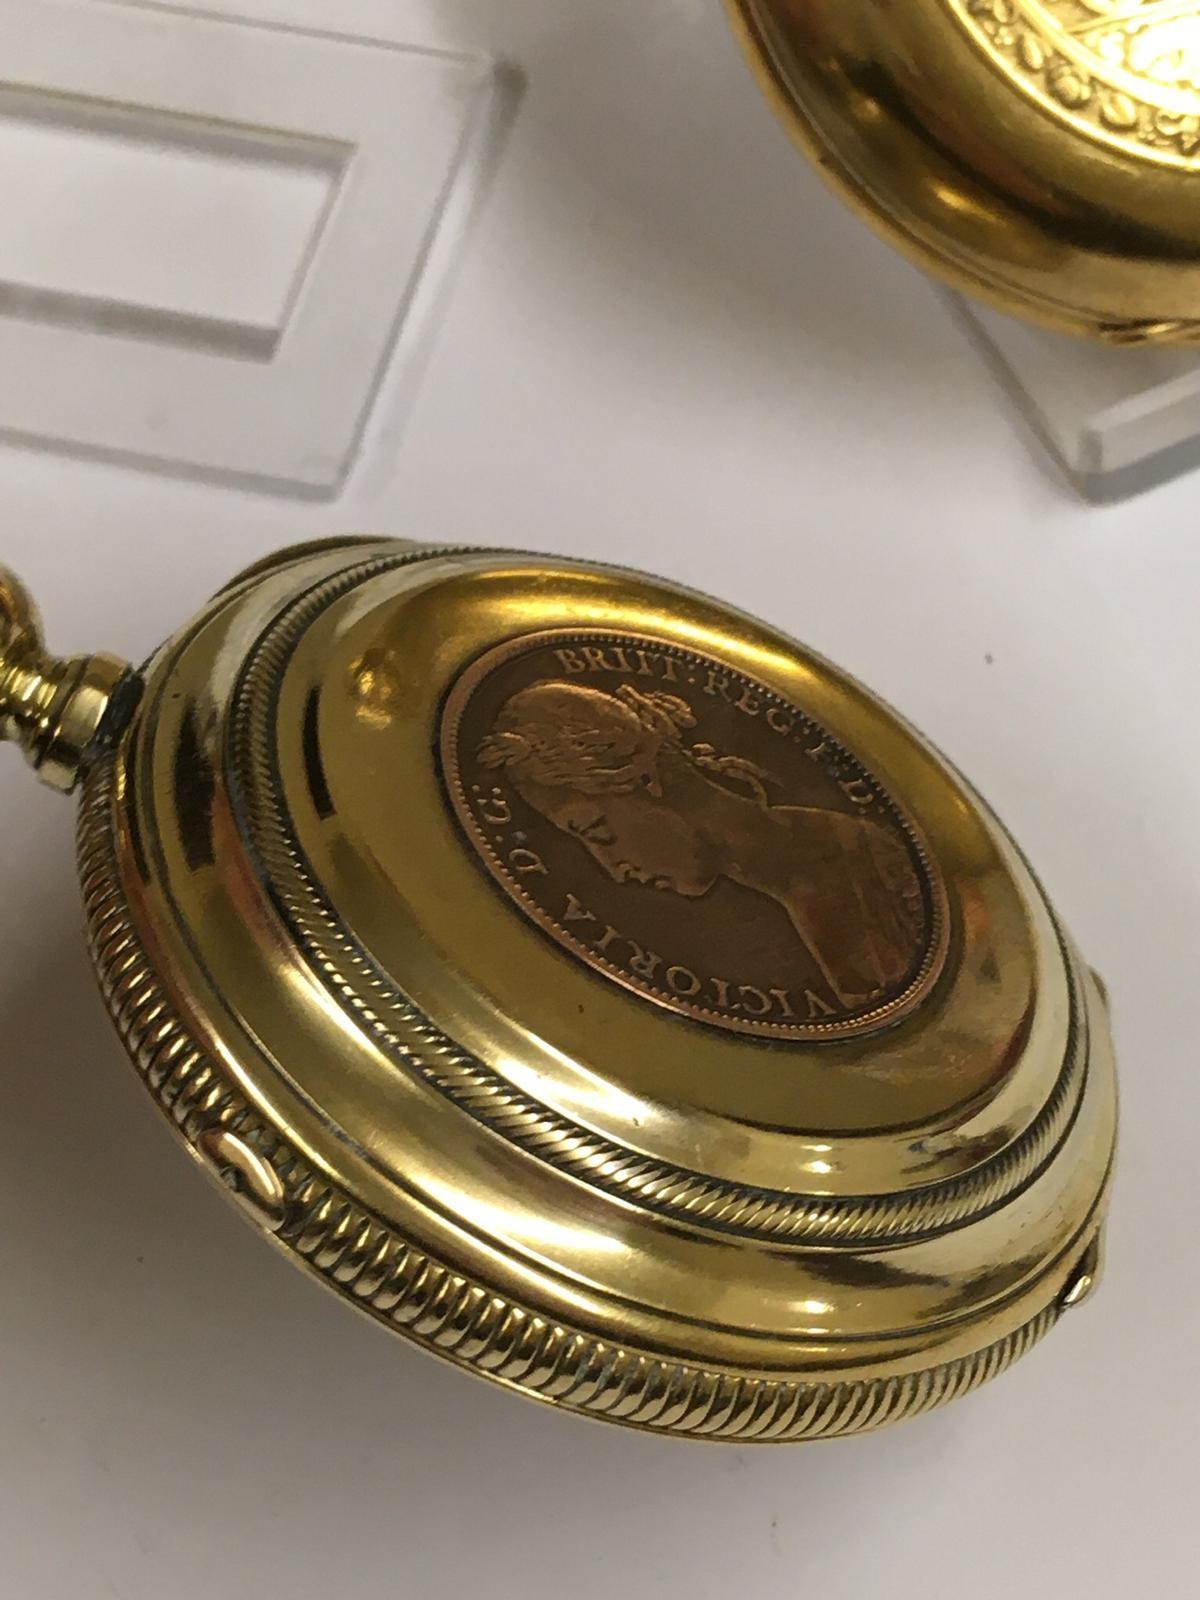 Antique Goliath pocket watch and very large antique Chronograph pocket watch (2) - Image 8 of 11